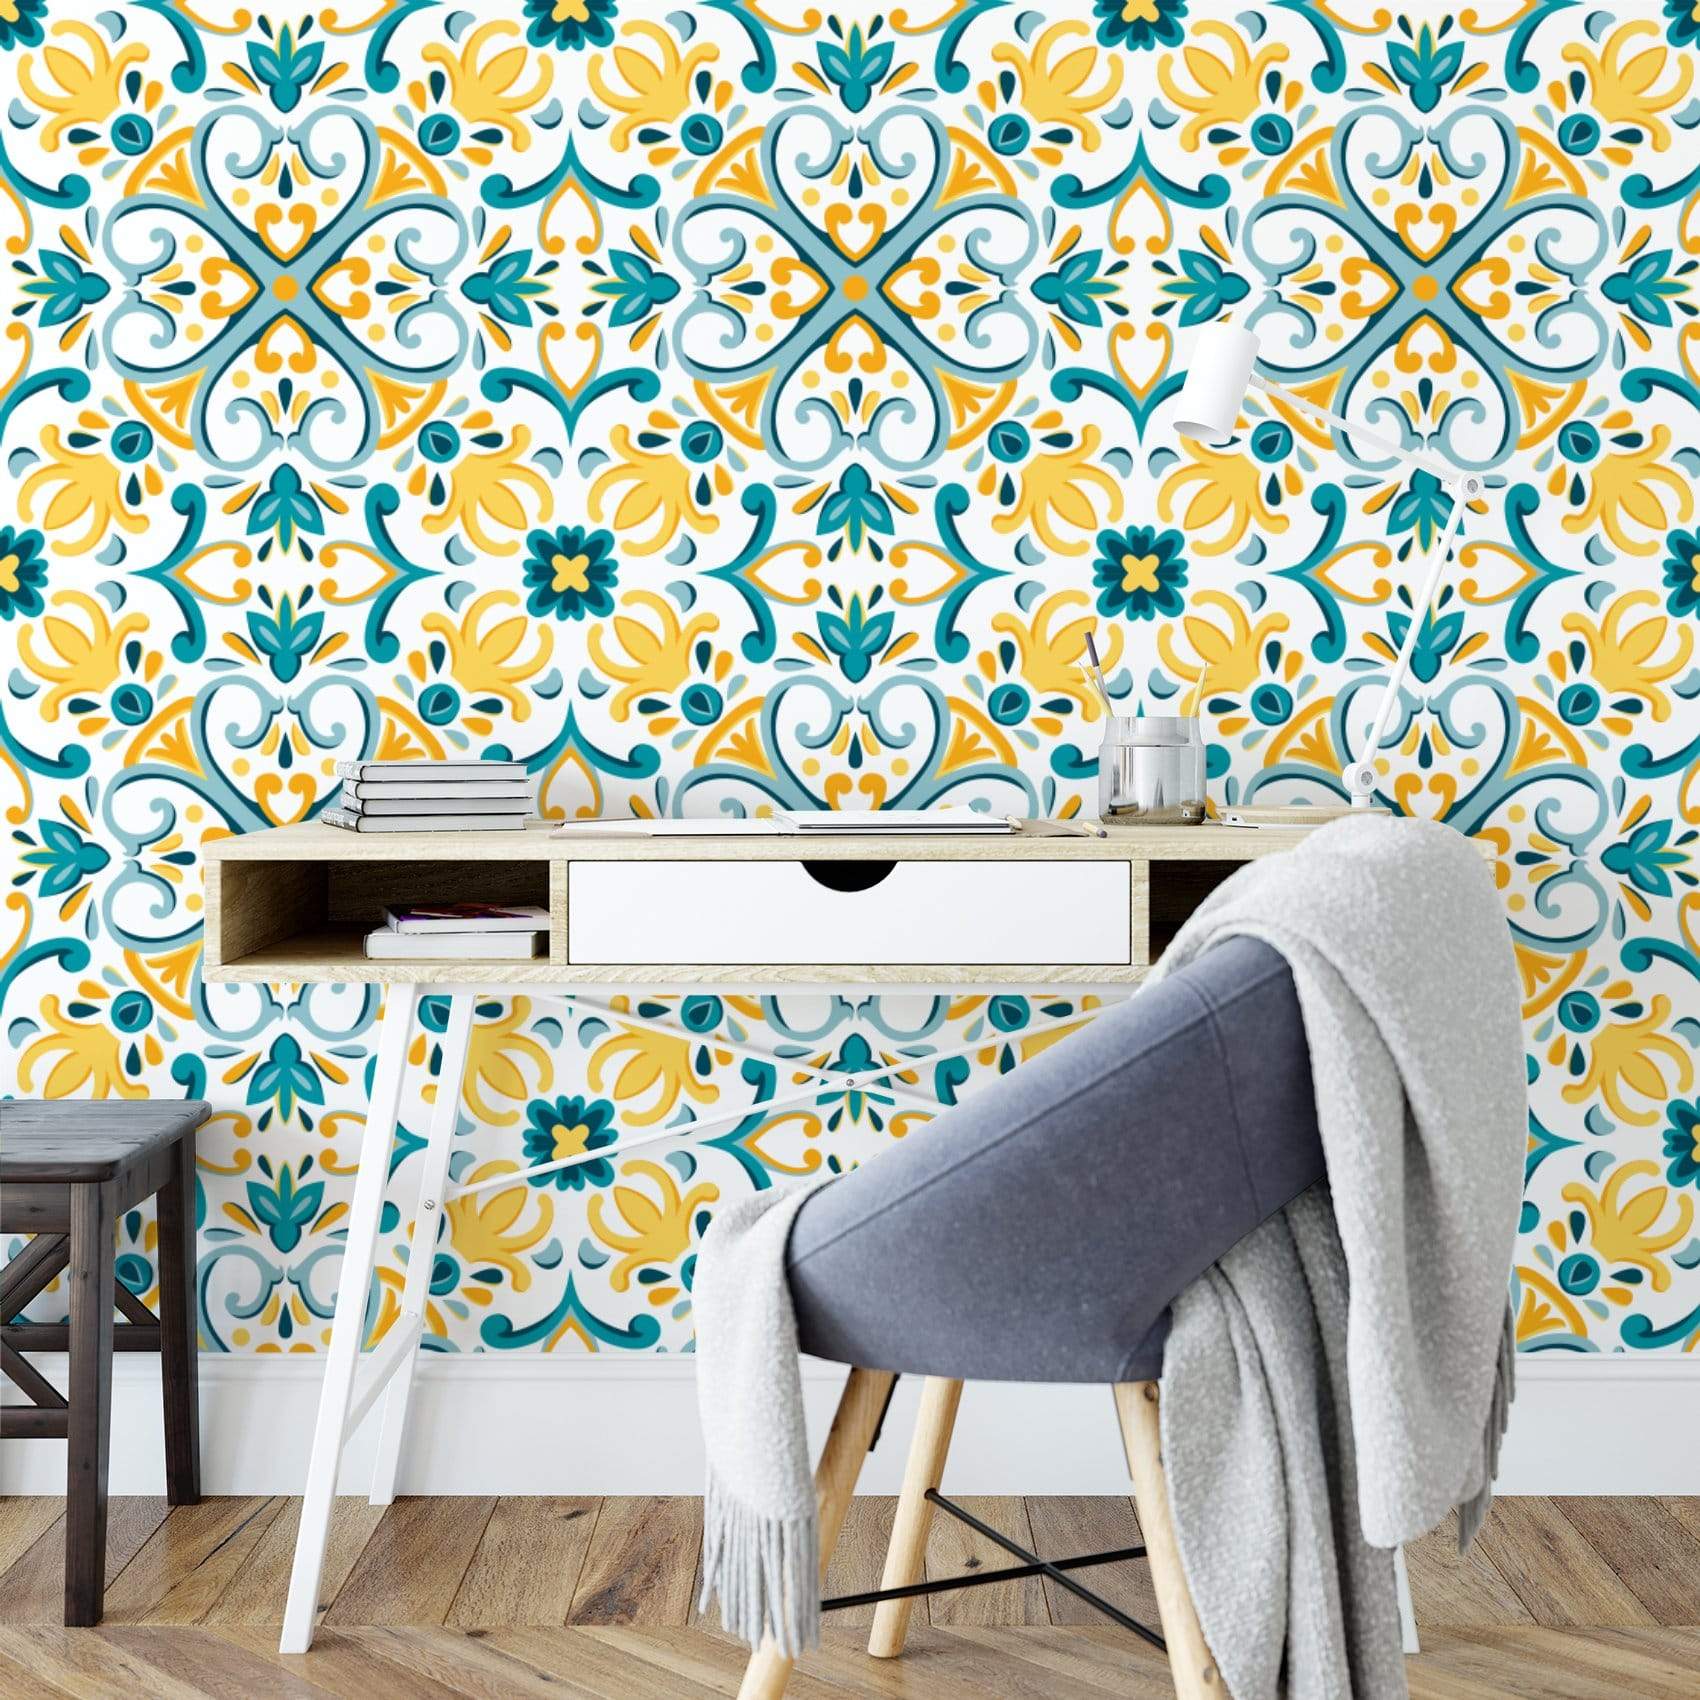 Graphic Tile Peel and Stick Wallpaper by Seabrook  Lelands Wallpaper  Peel  and stick wallpaper Graphic tiles Round mirror bathroom